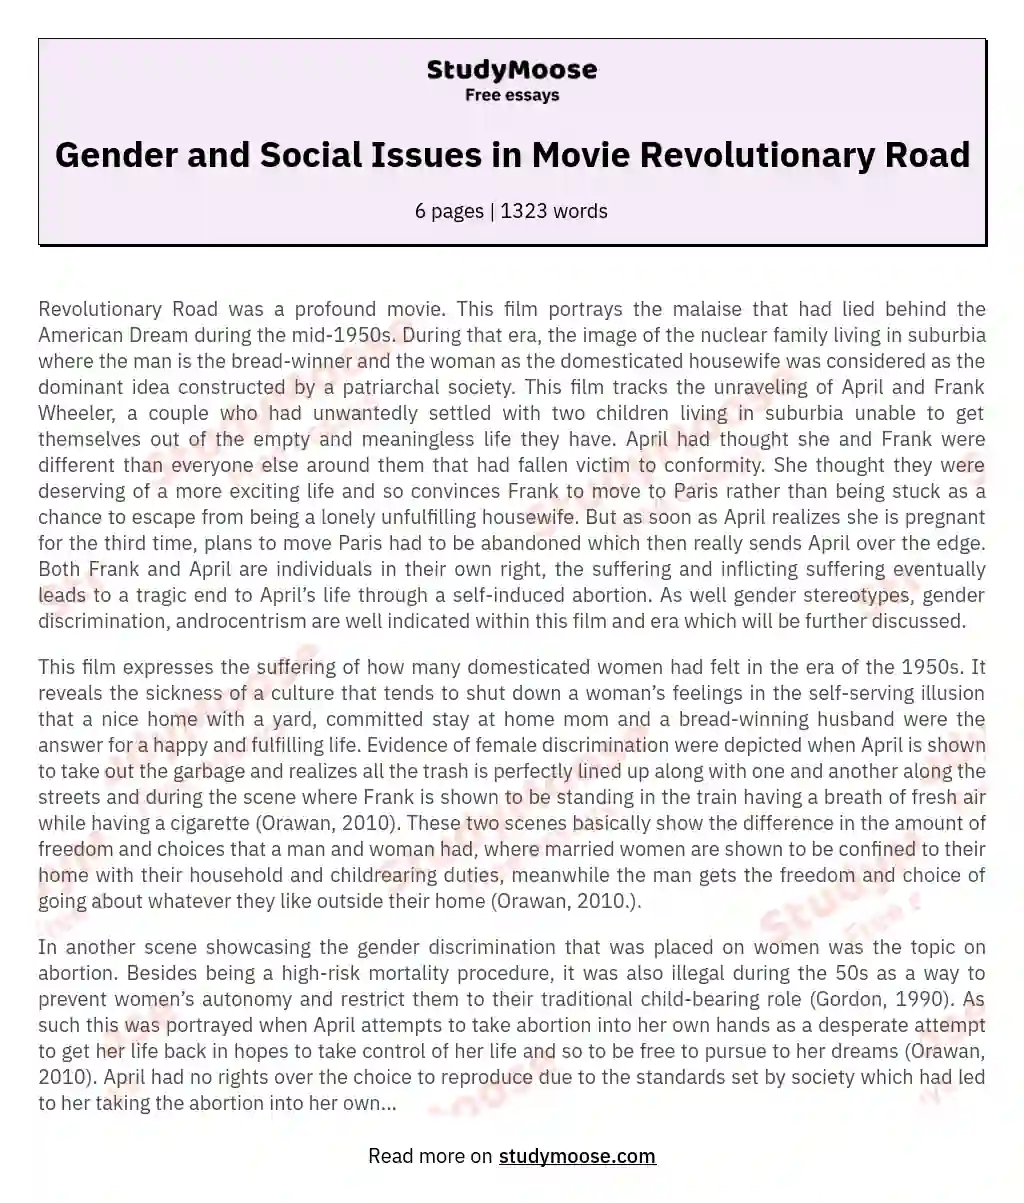 Gender and Social Issues in Movie Revolutionary Road